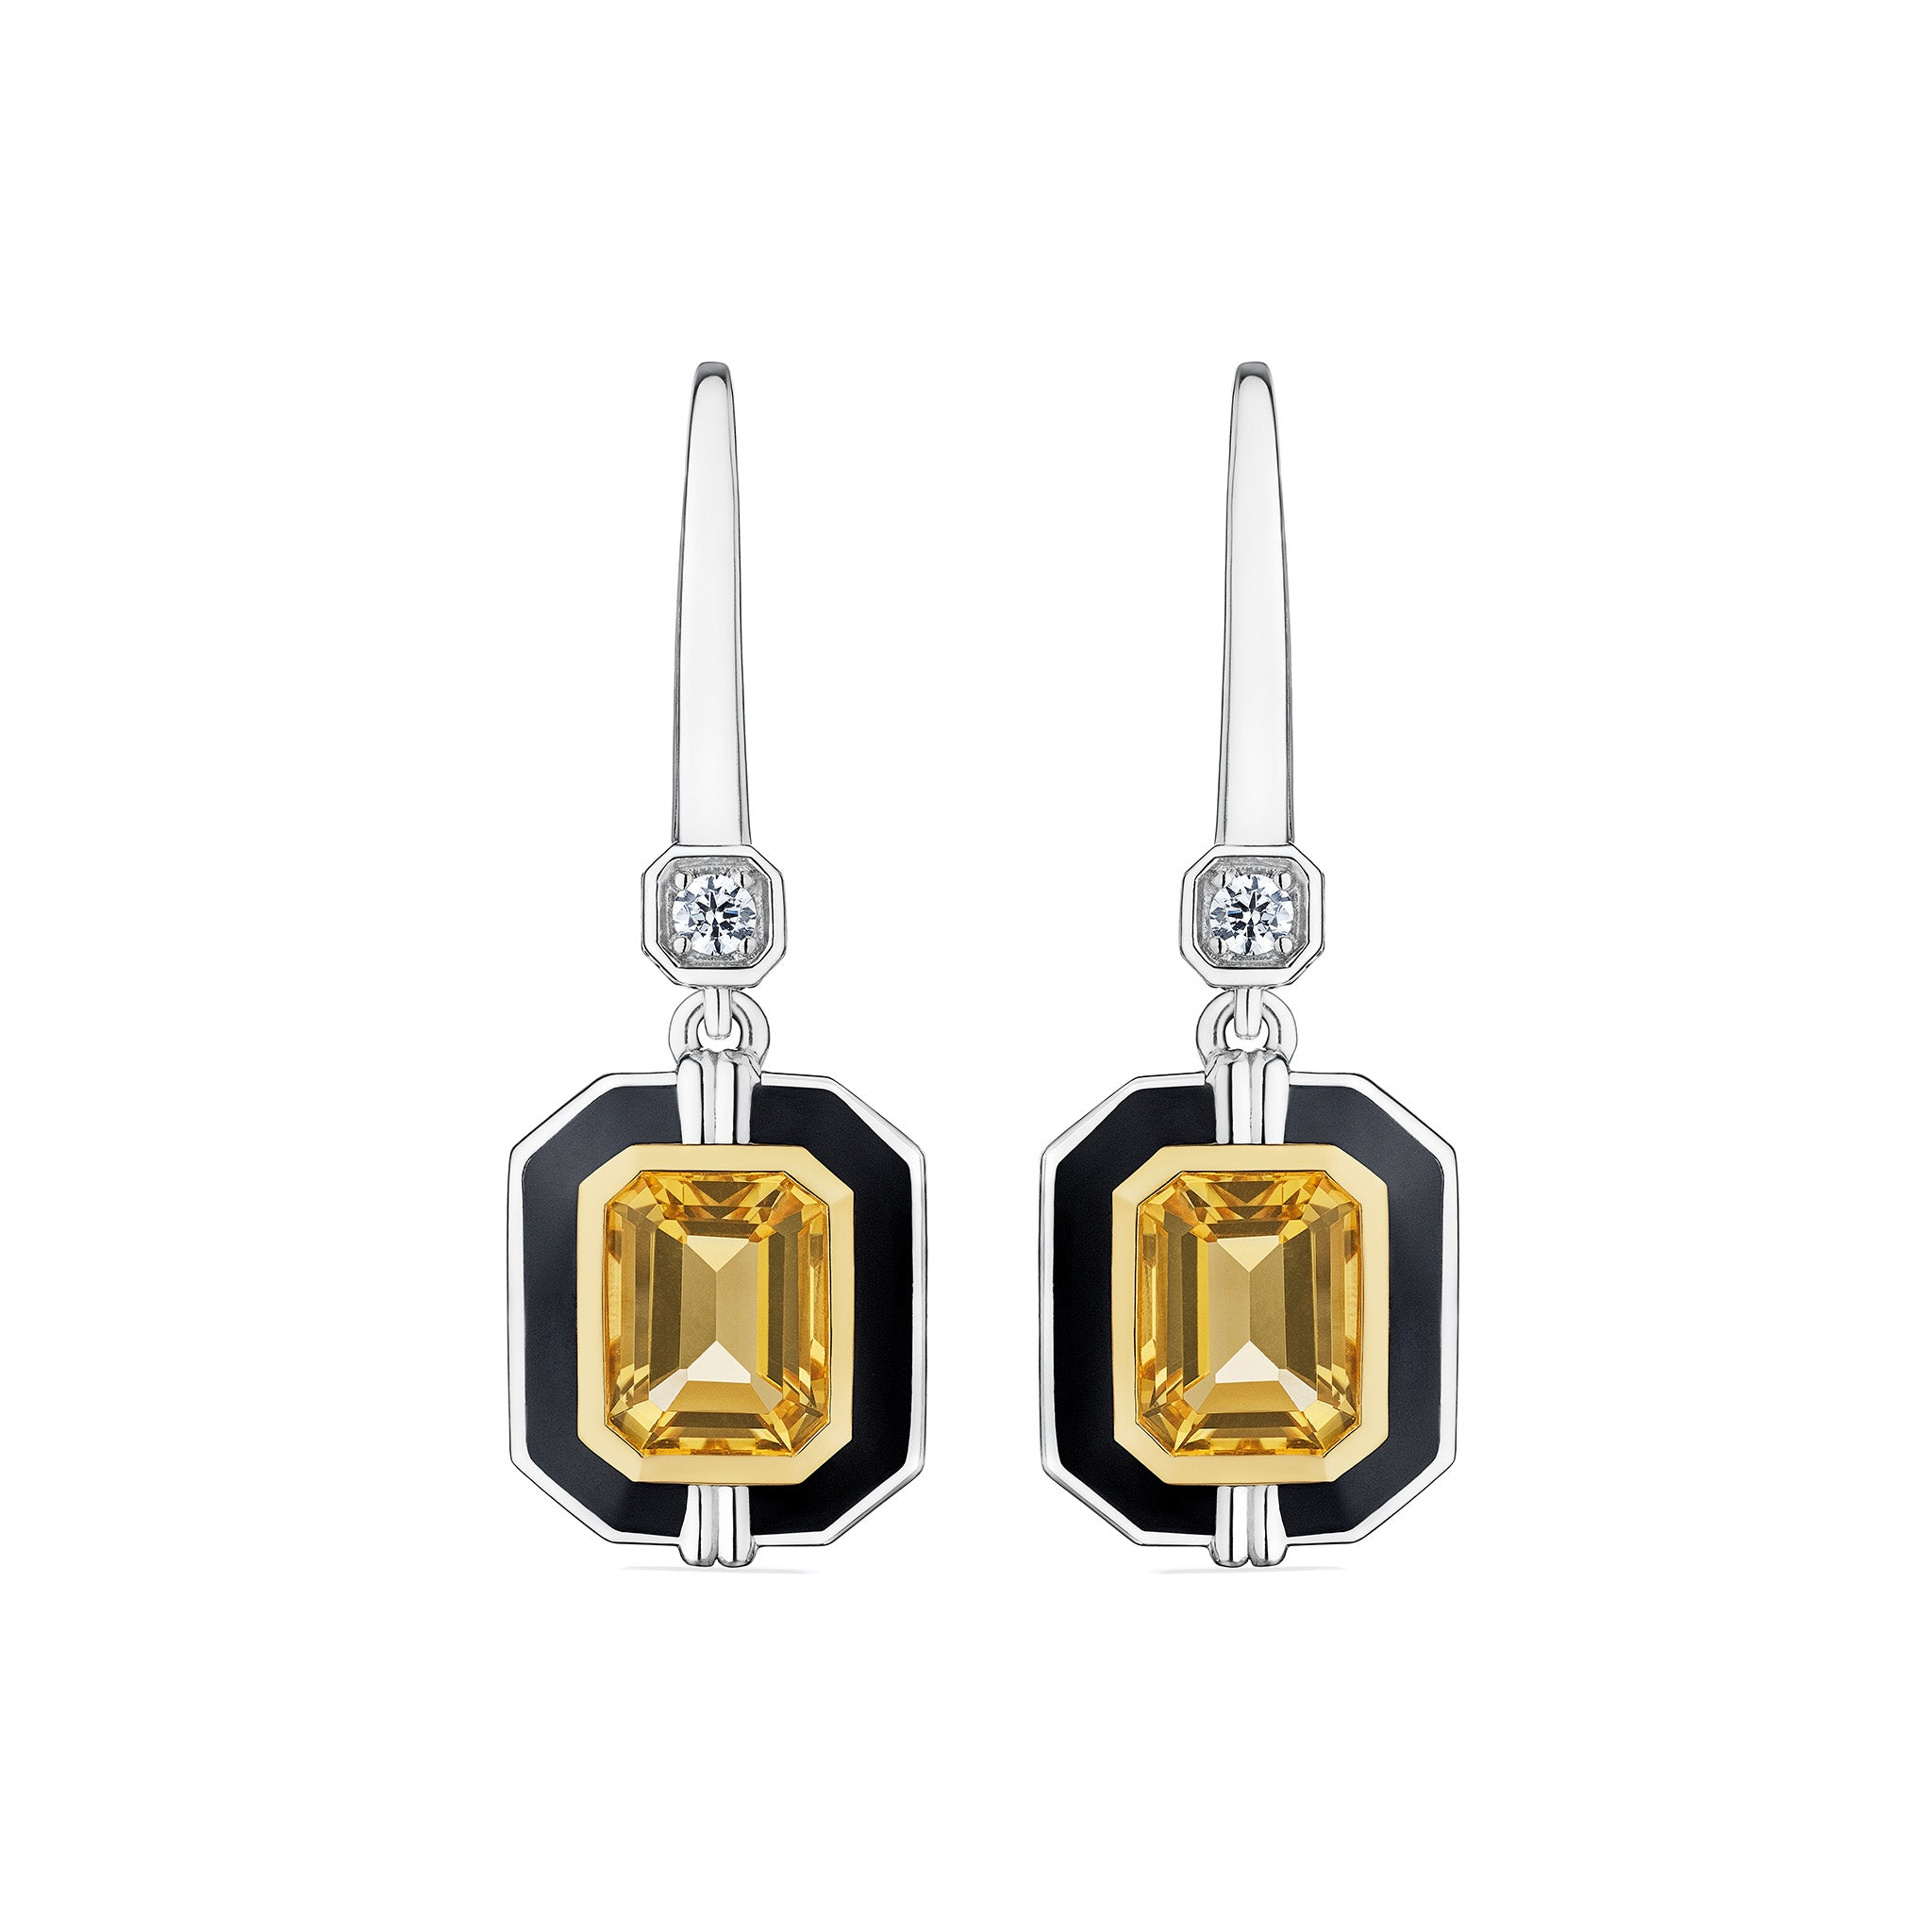 Adrienne Drop Earrings with Enamel, Champagne Citrine, Diamonds and 18K Gold